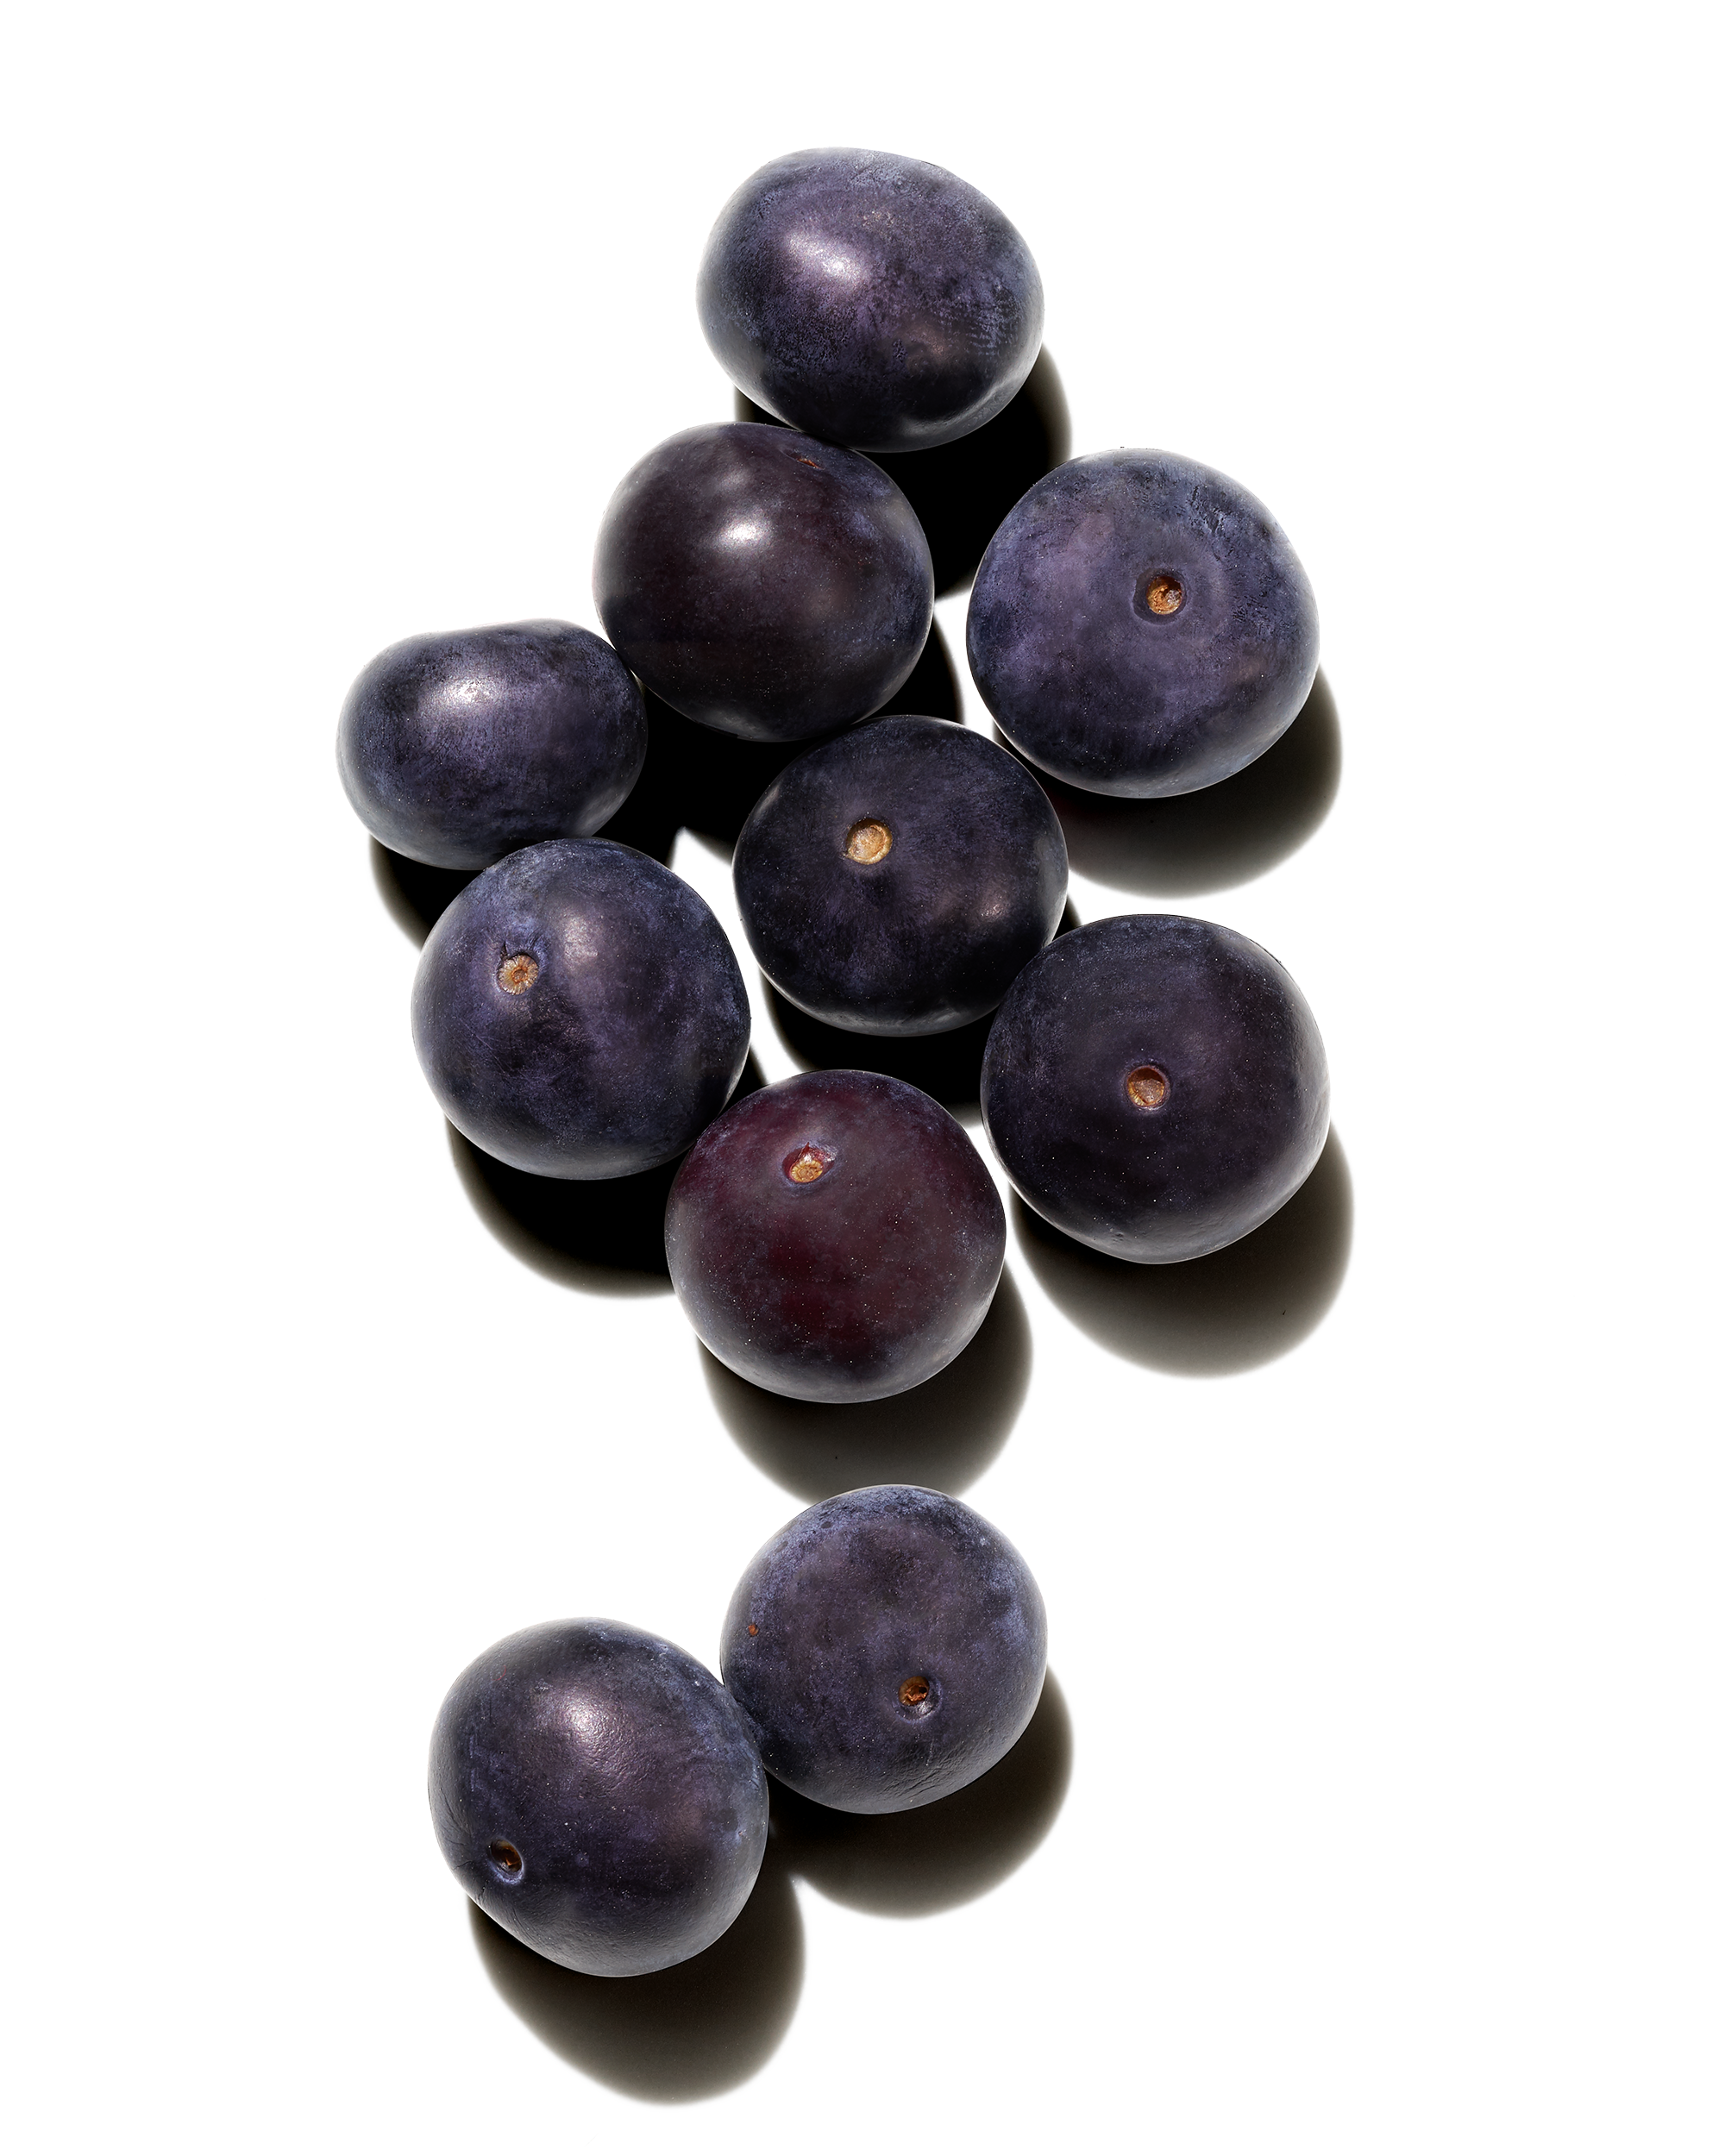 acai berries on white background